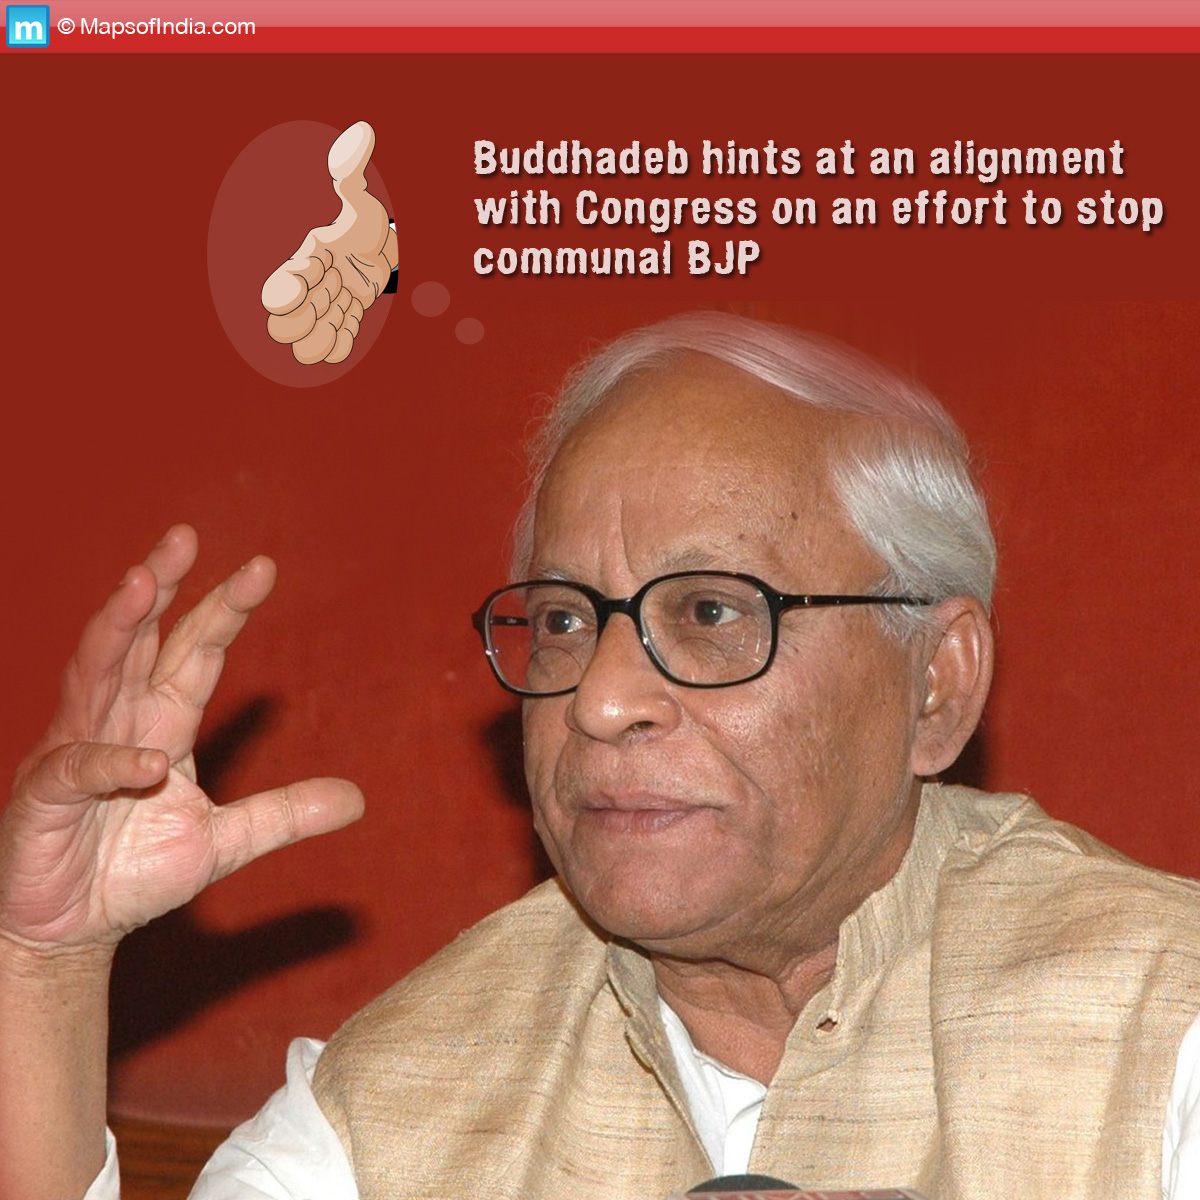 Buddhadeb hints at an alignment with Congress on an effort to stop communal BJP